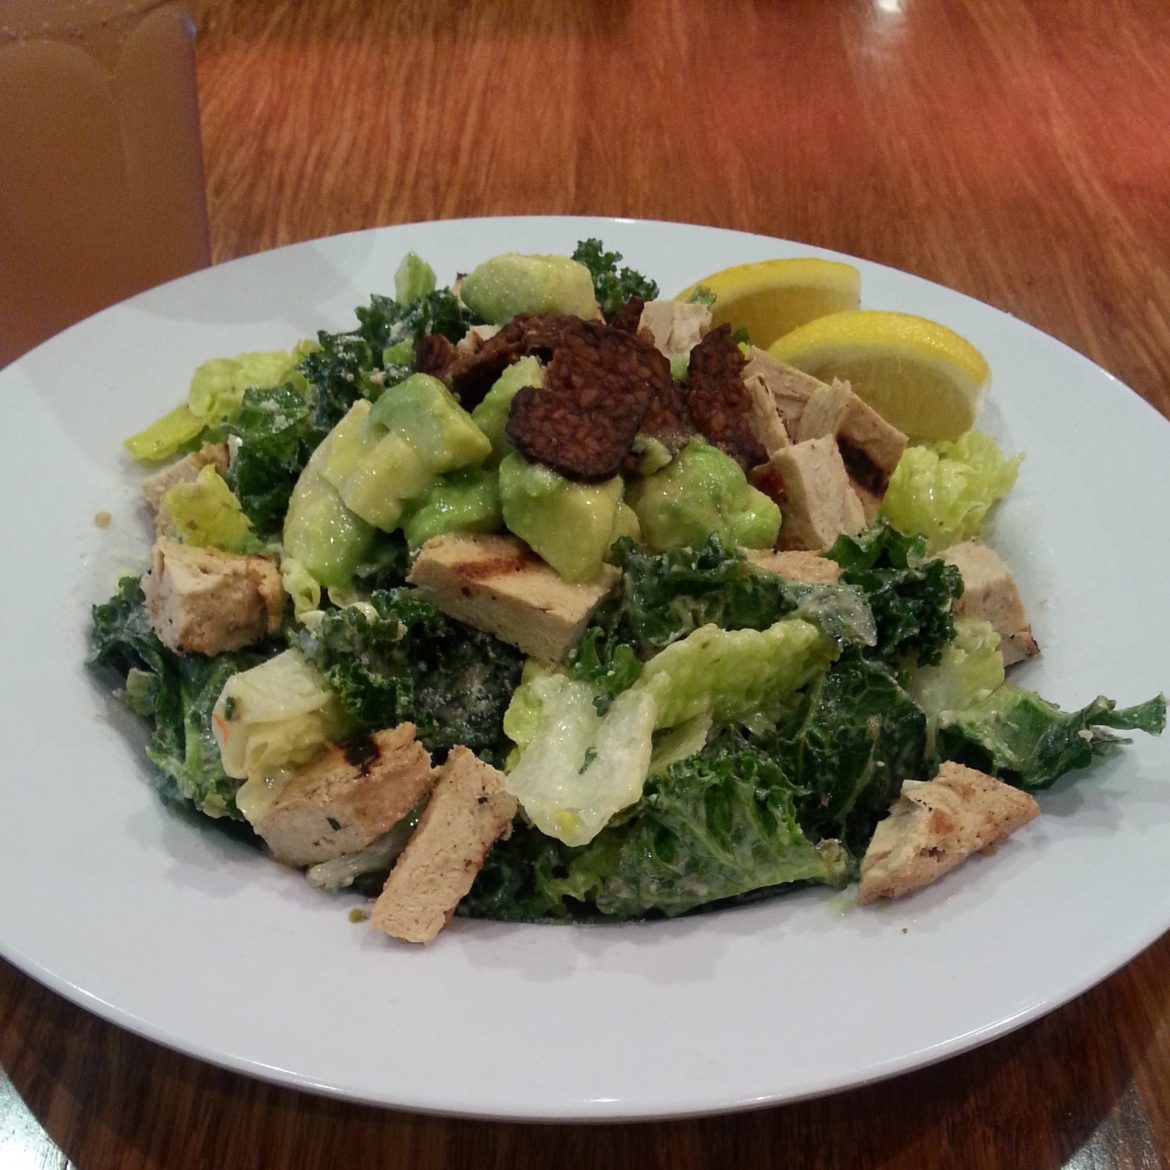 Vegan kale caesar salad with grilled chicken and bacon bits (from Veggie Grill)